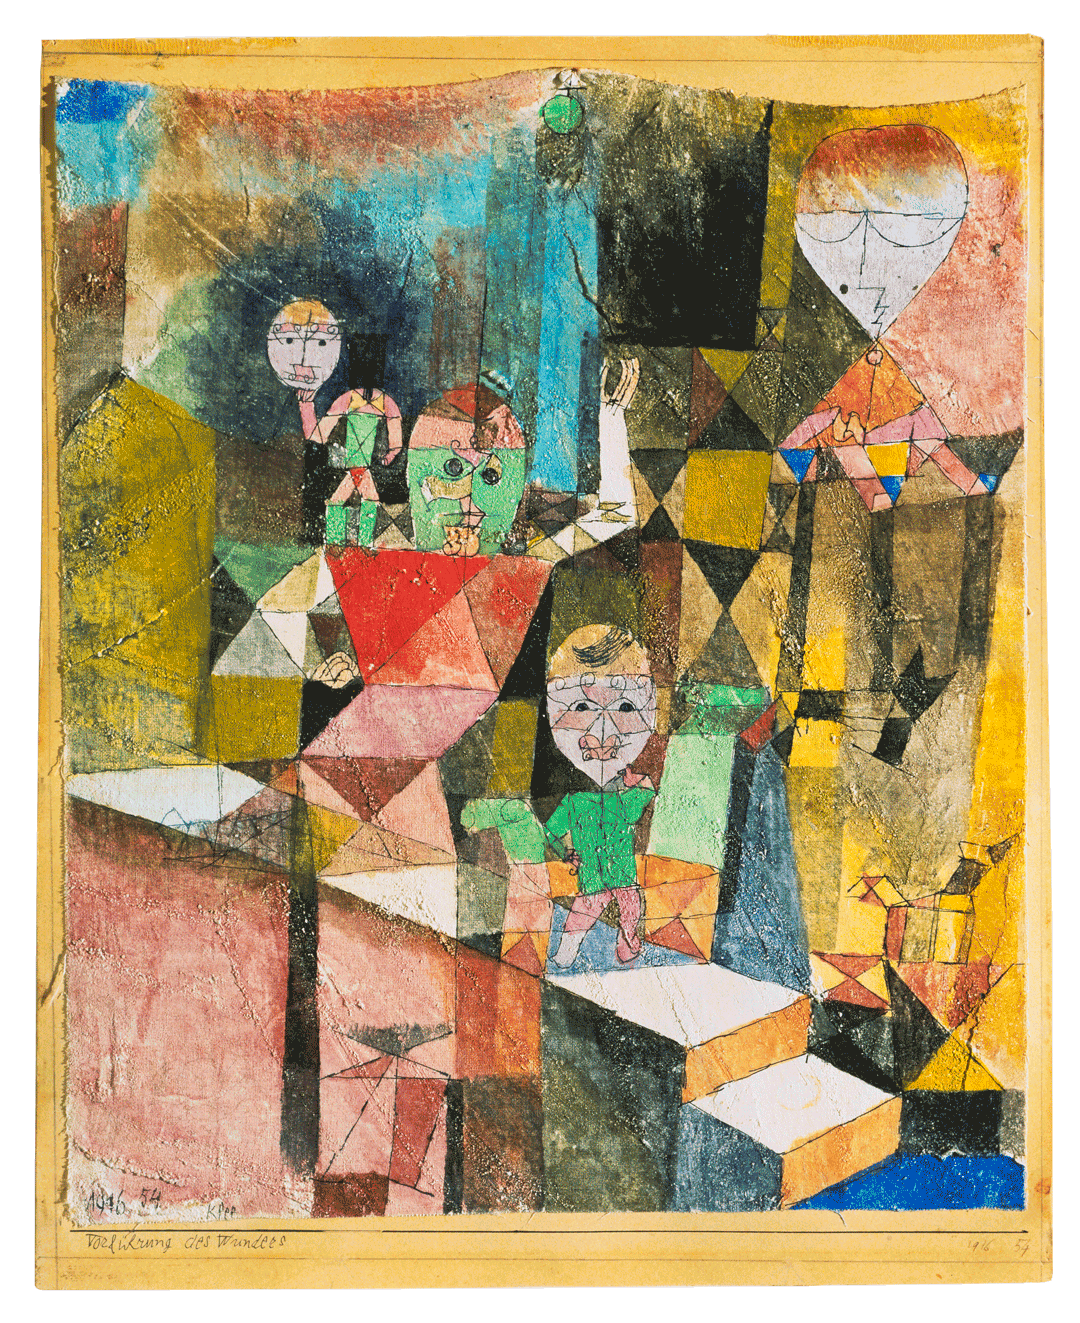 A mixed media work on board by Paul Klee, titled Introducing the Miracle, dated 1916.